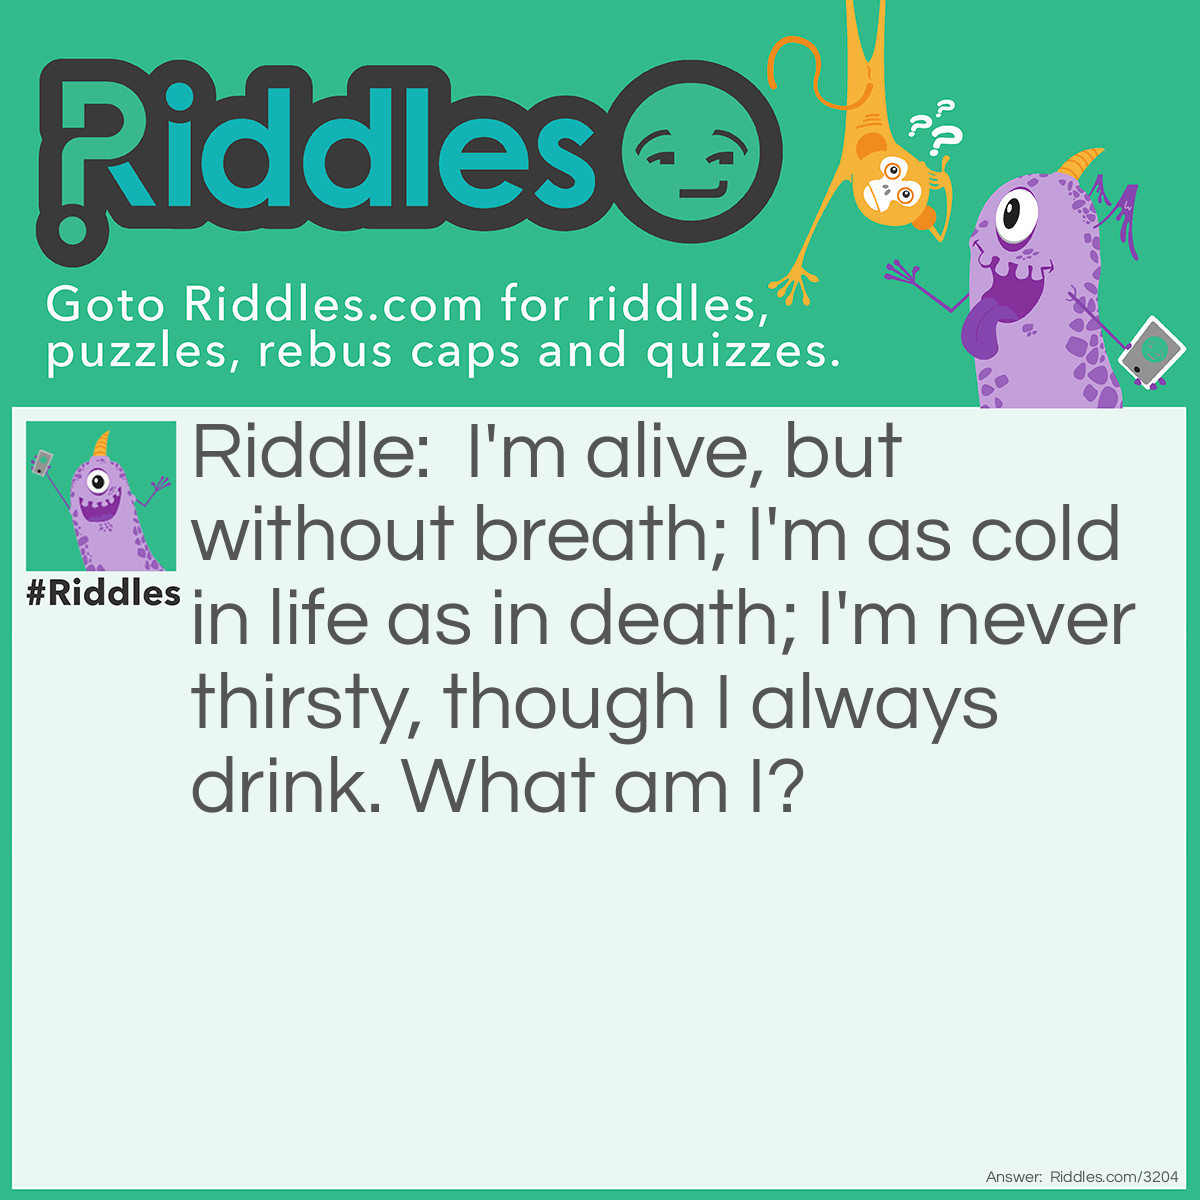 Riddle: I'm alive, but without breath; I'm as cold in life as in death; I'm never thirsty, though I always drink. What am I? Answer: A fish.